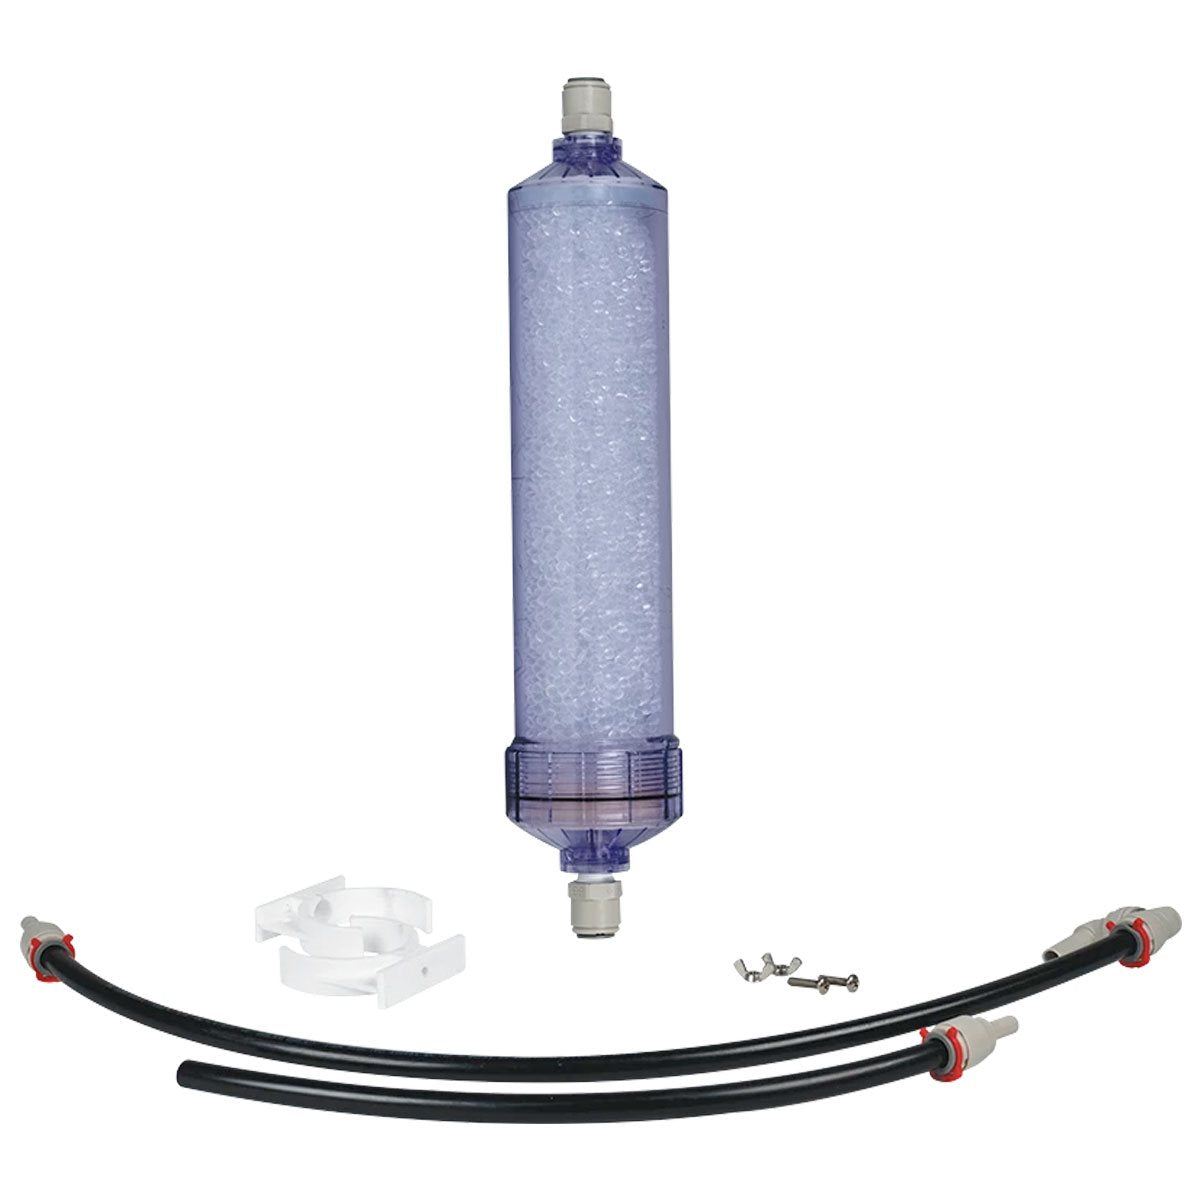 Product Image:Kit antitartre,filtre, raccords, tubes et clips Hydro-Logic HYDROID